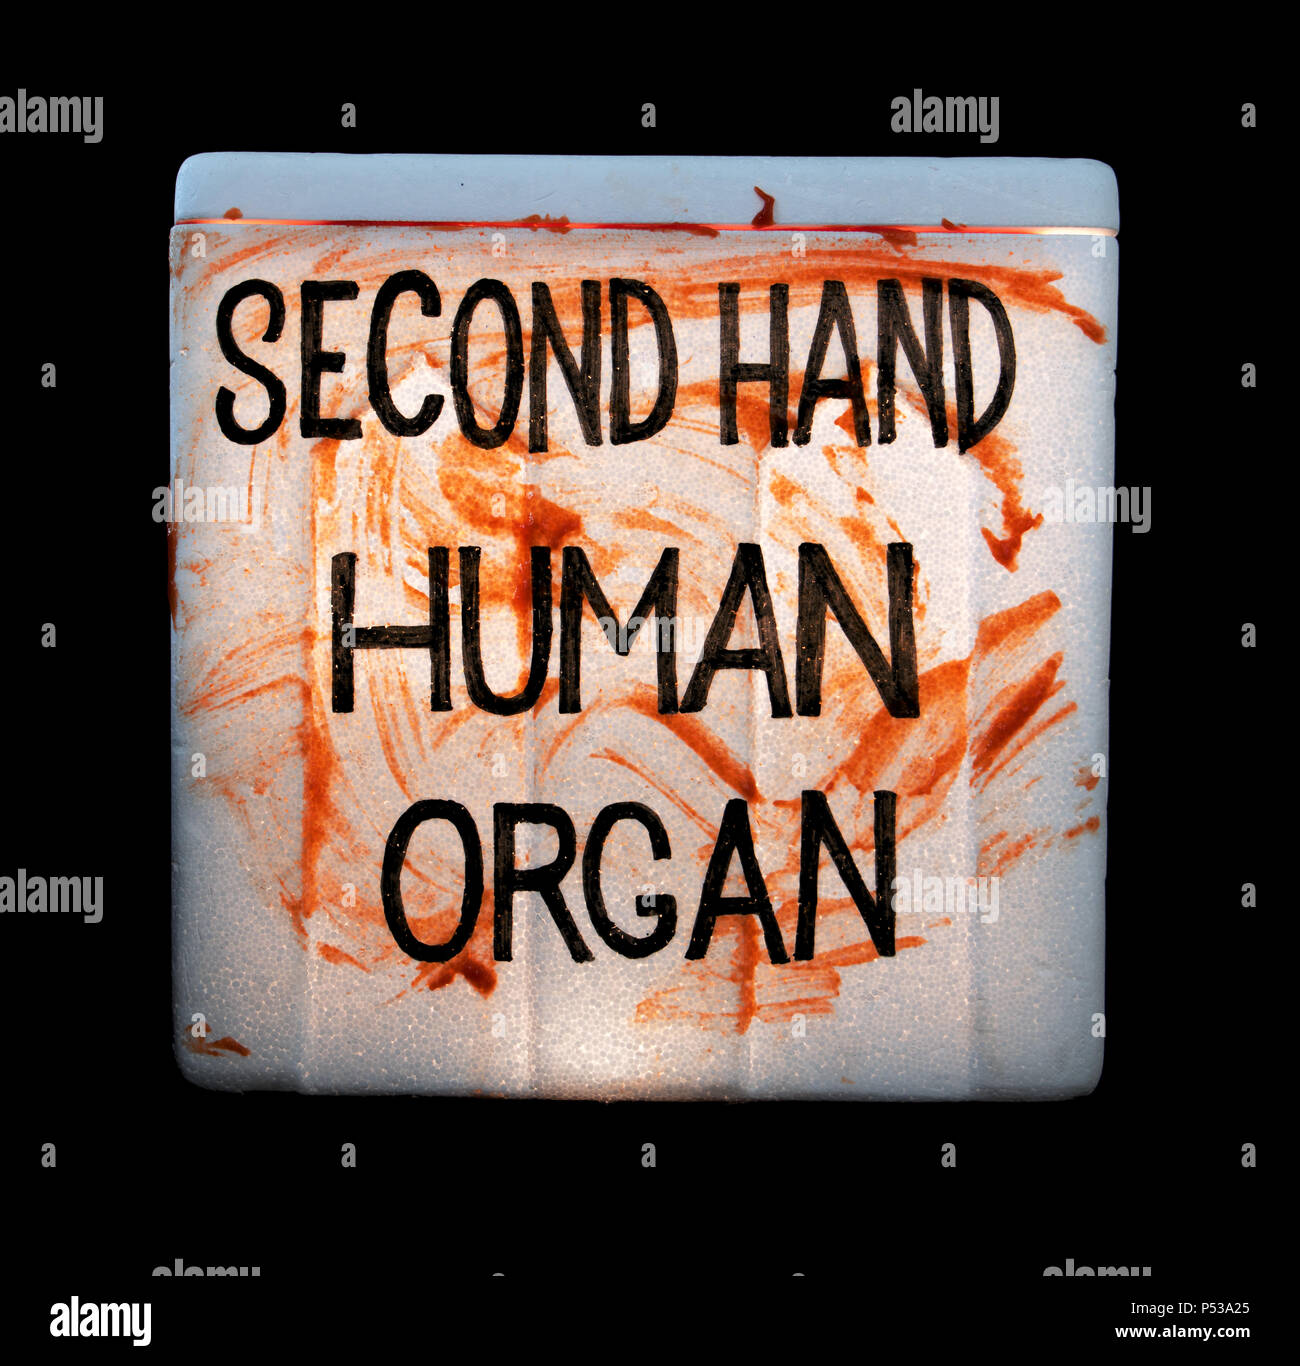 ️ Why the sale of human organs should be illegal. Let